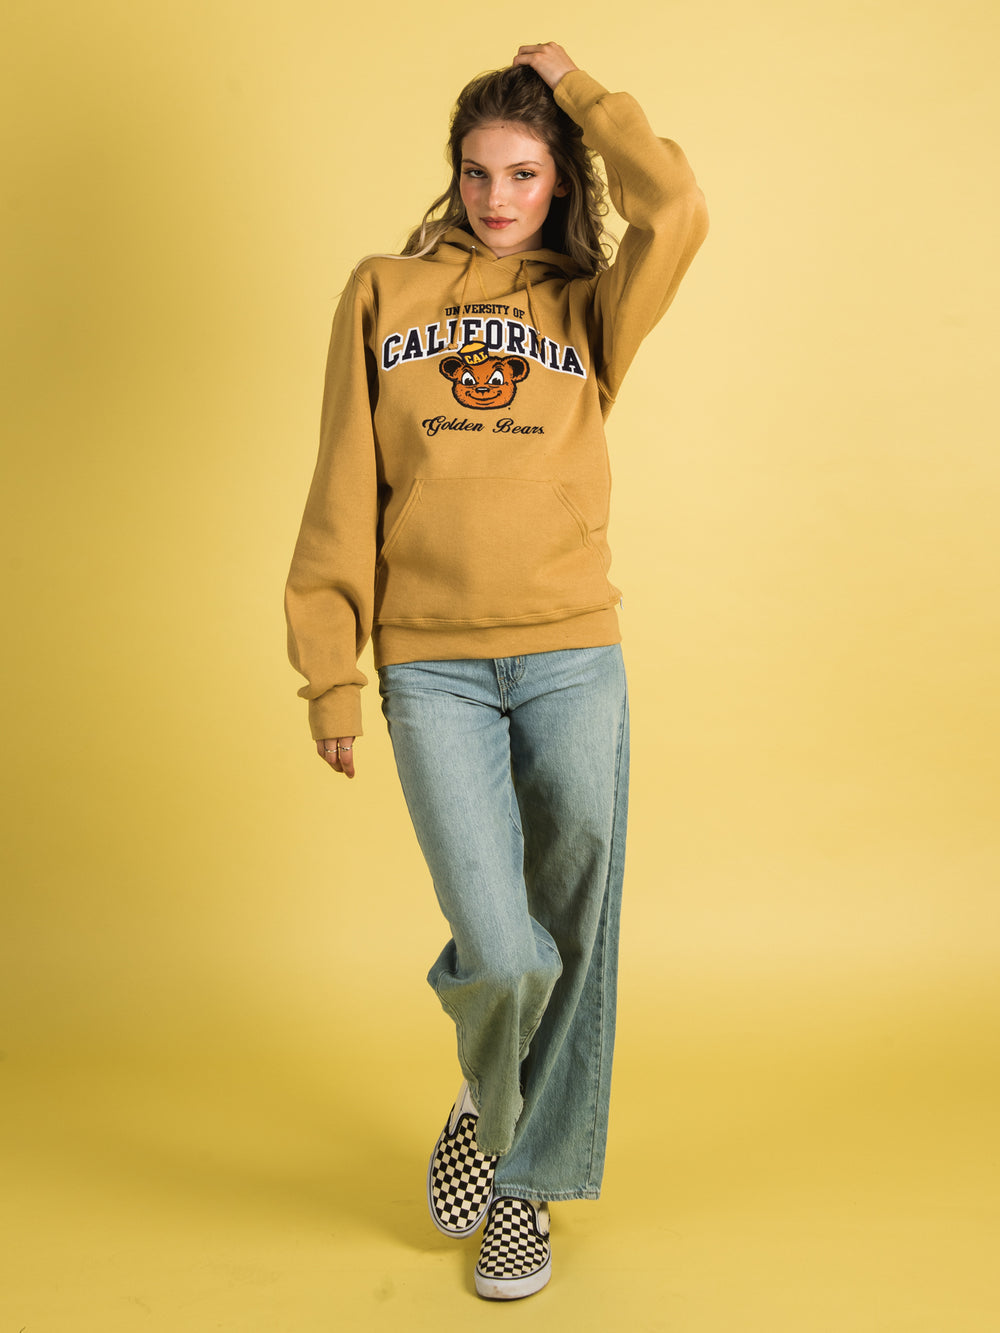 UCSB SEAL HOODIE BY RUSSELL ATHLETIC